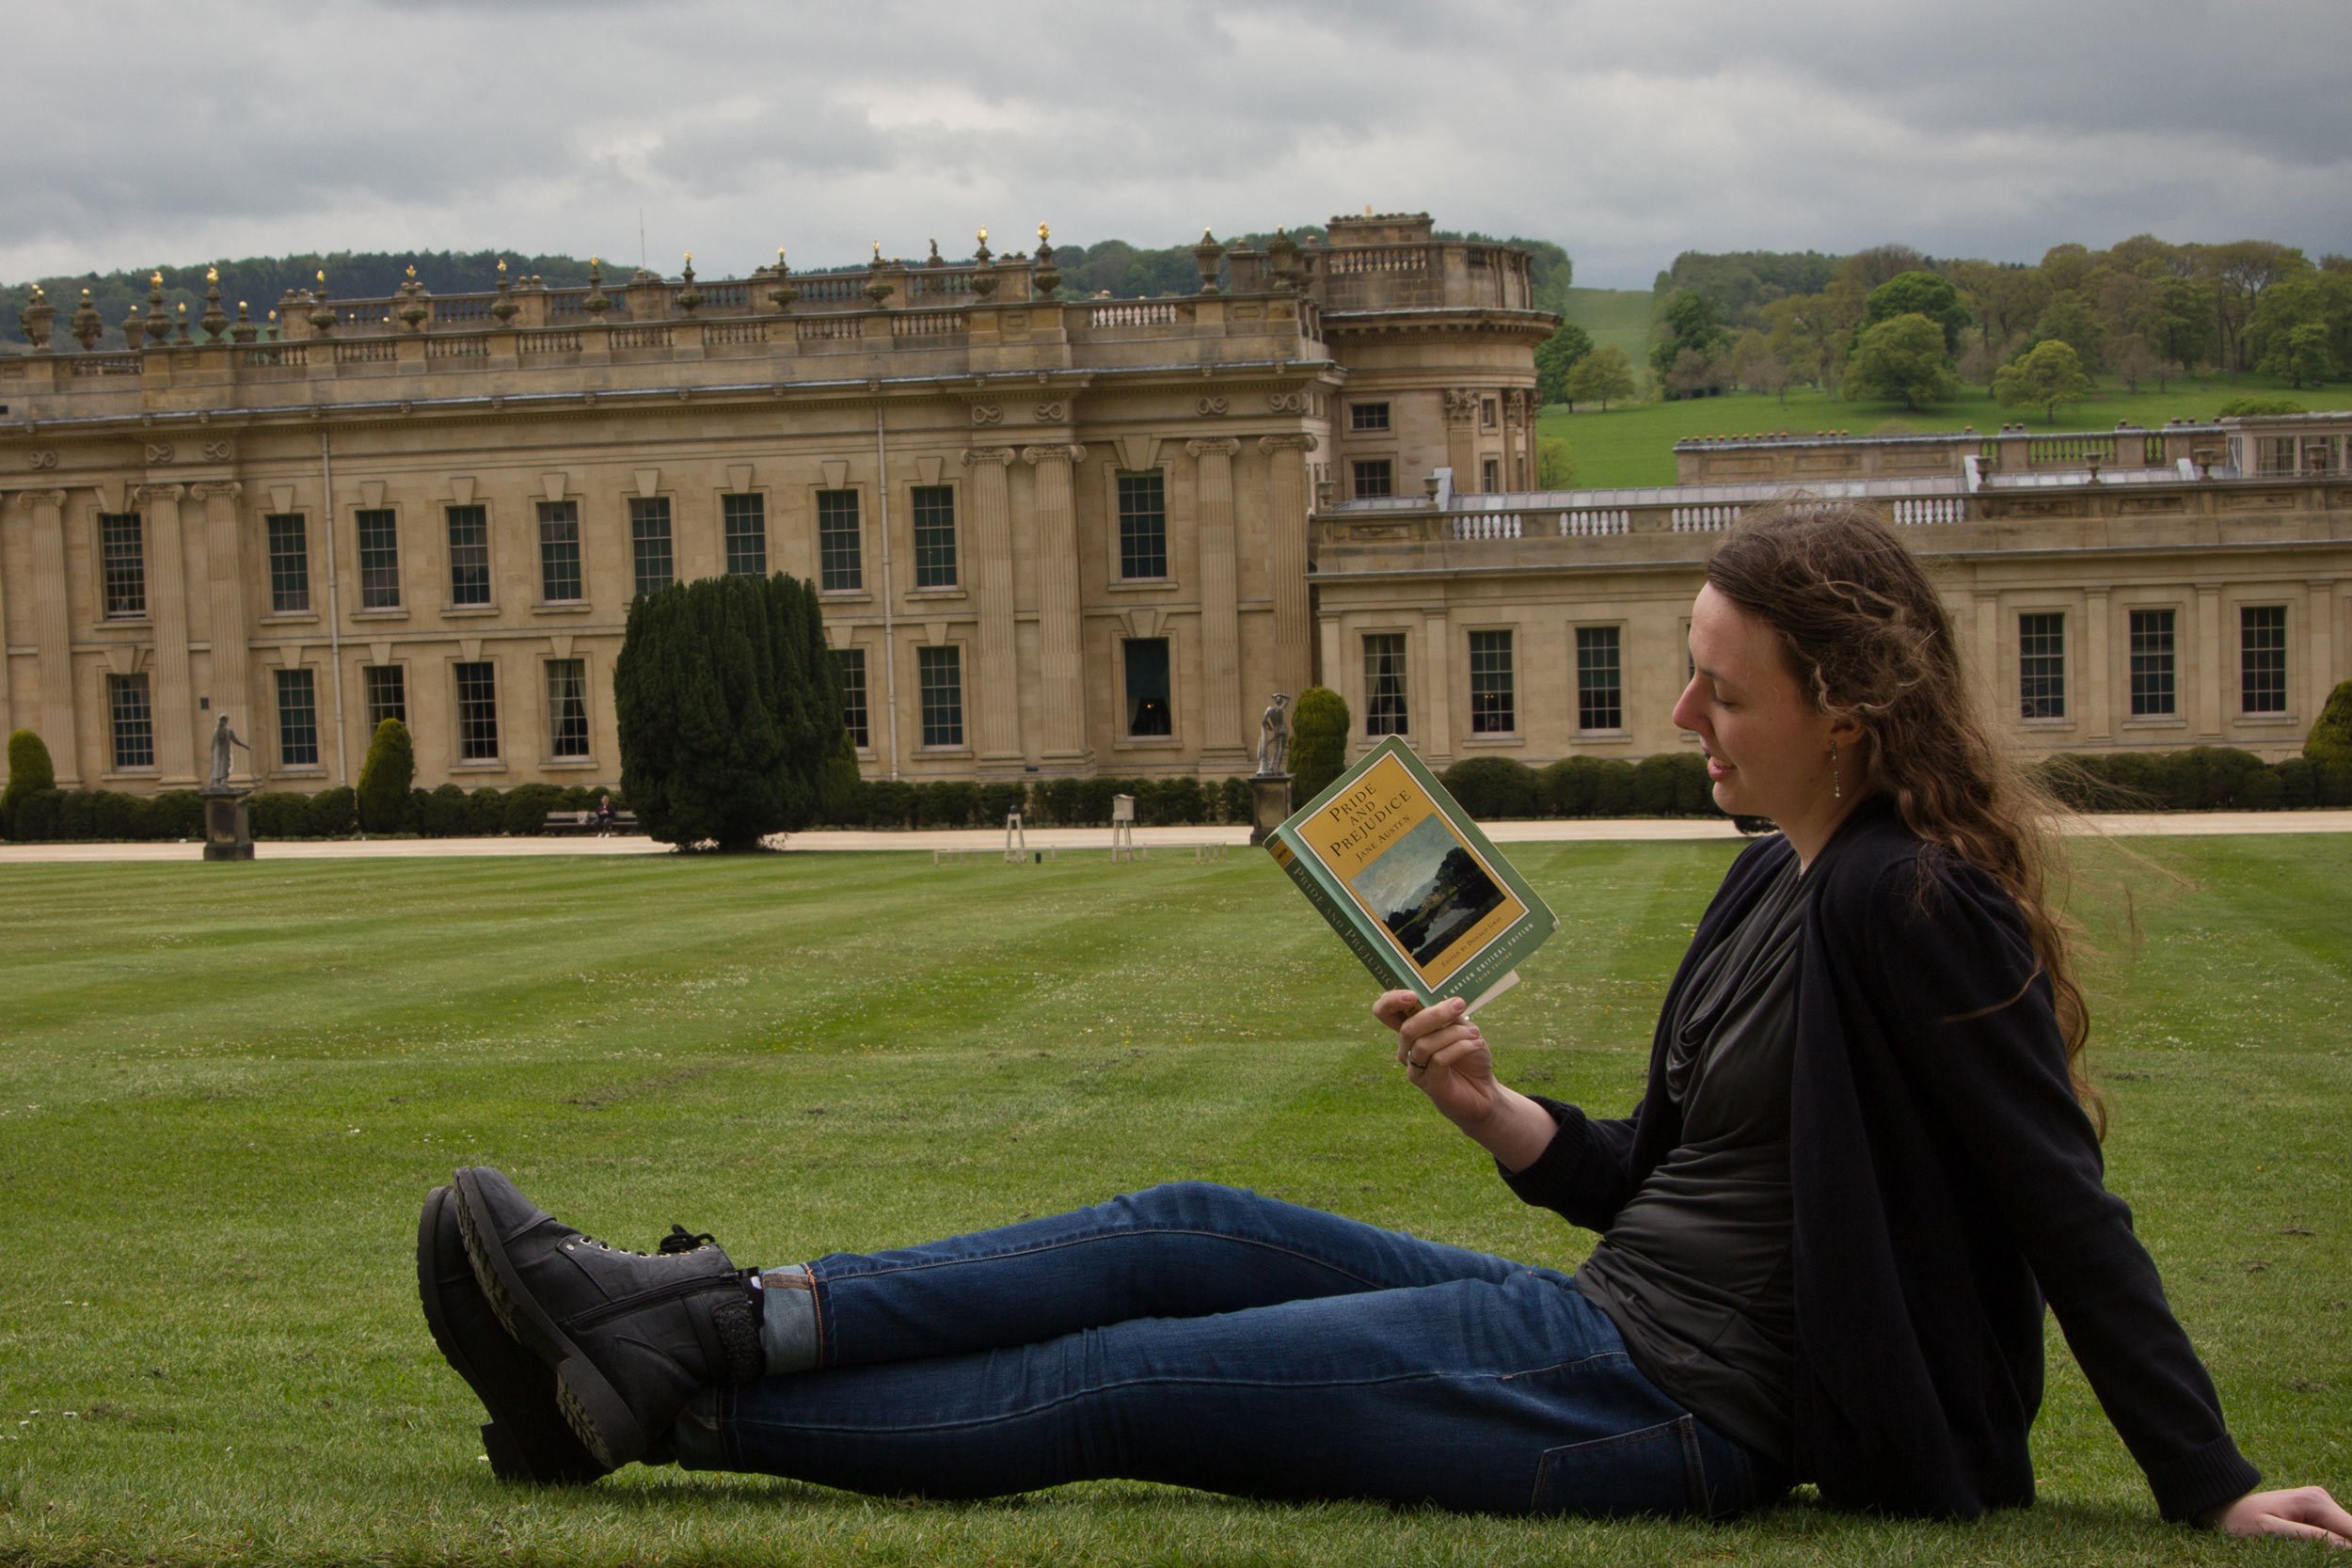 reading-pride-and-prejudice-in-front-of-chatsworth-house-central-england